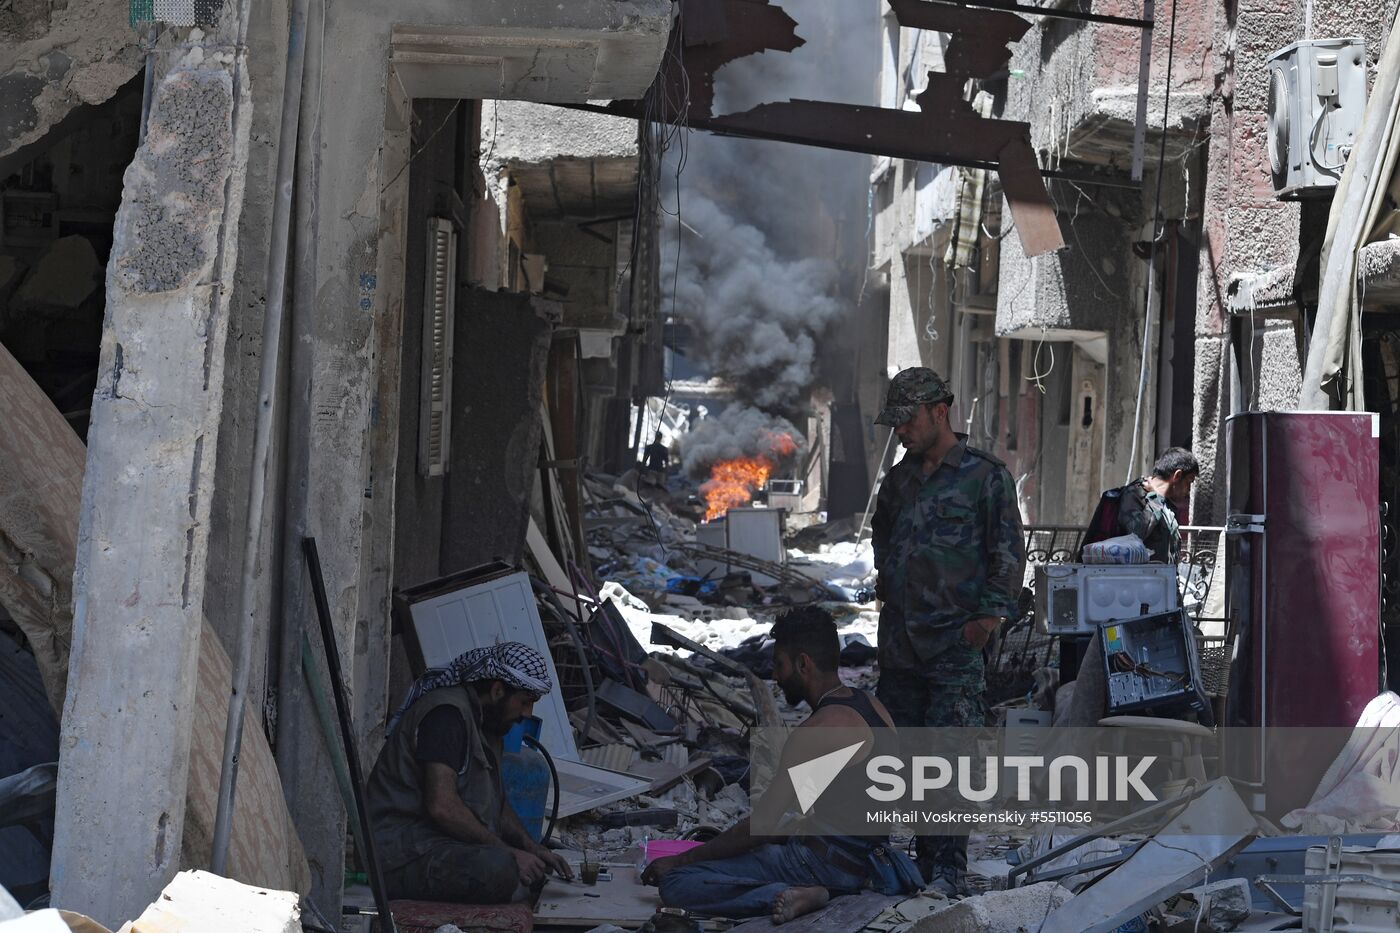 Yarmouk refugee camp in south of Damascus freed from militants